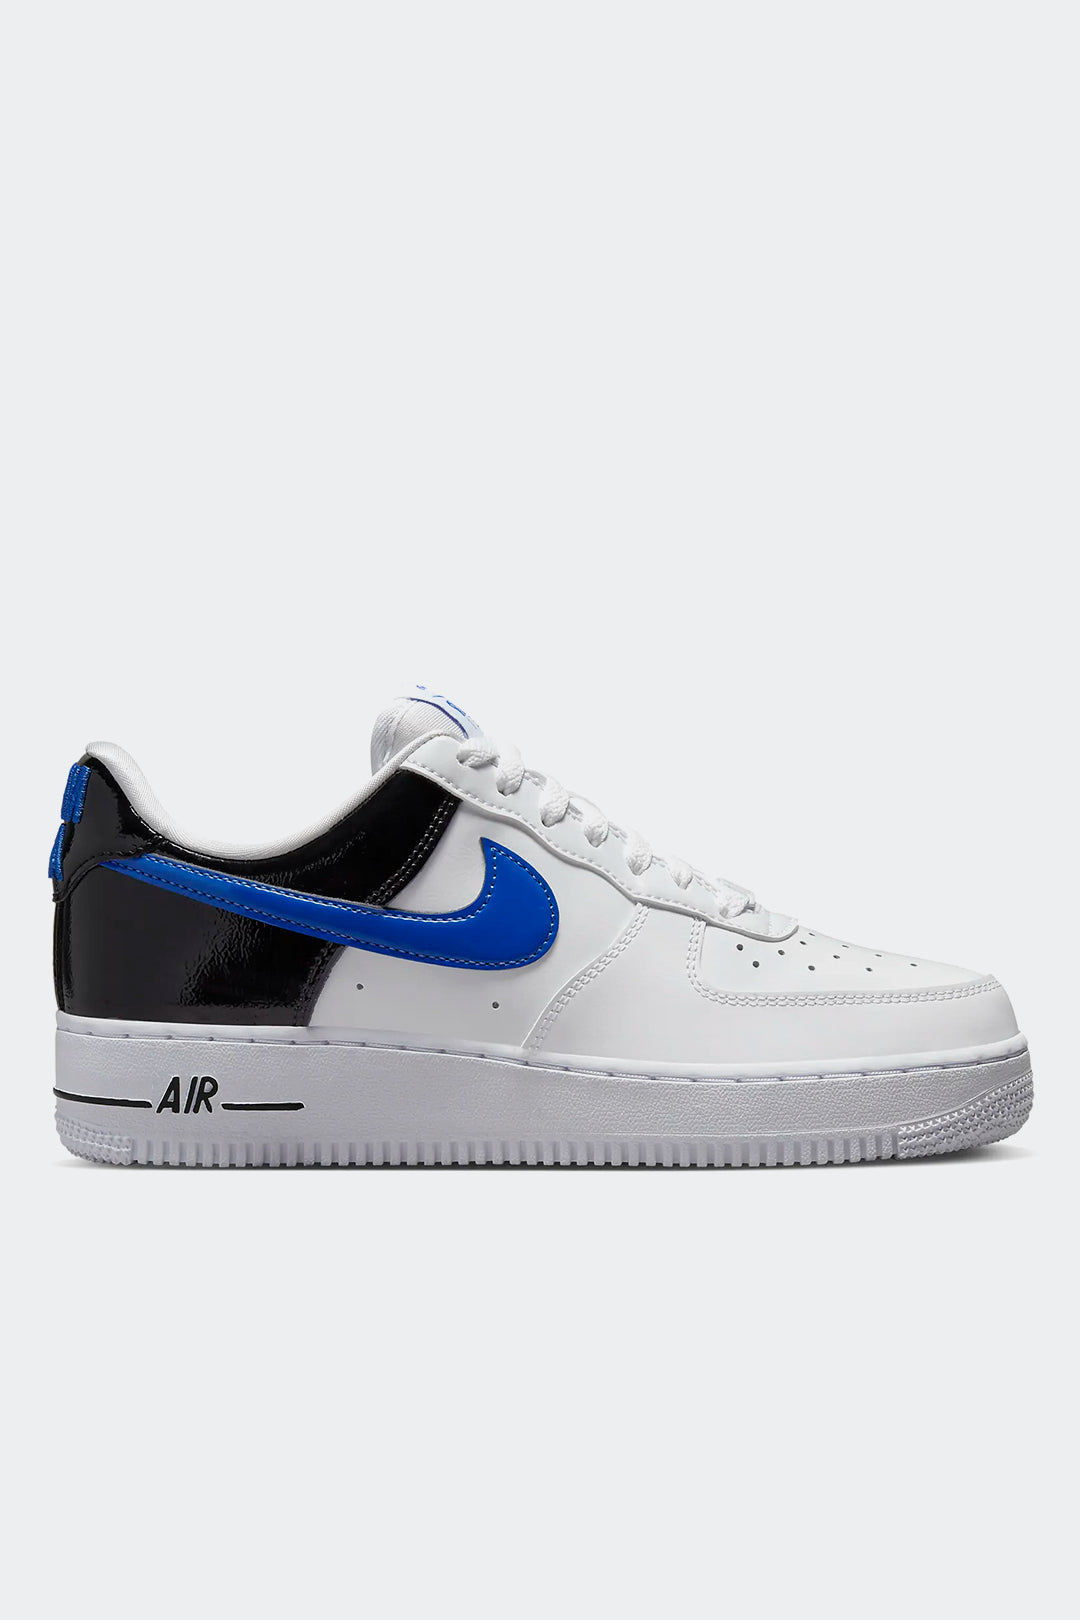 Mujer Nike Air Force 1 '07 Sp23 | HYPE